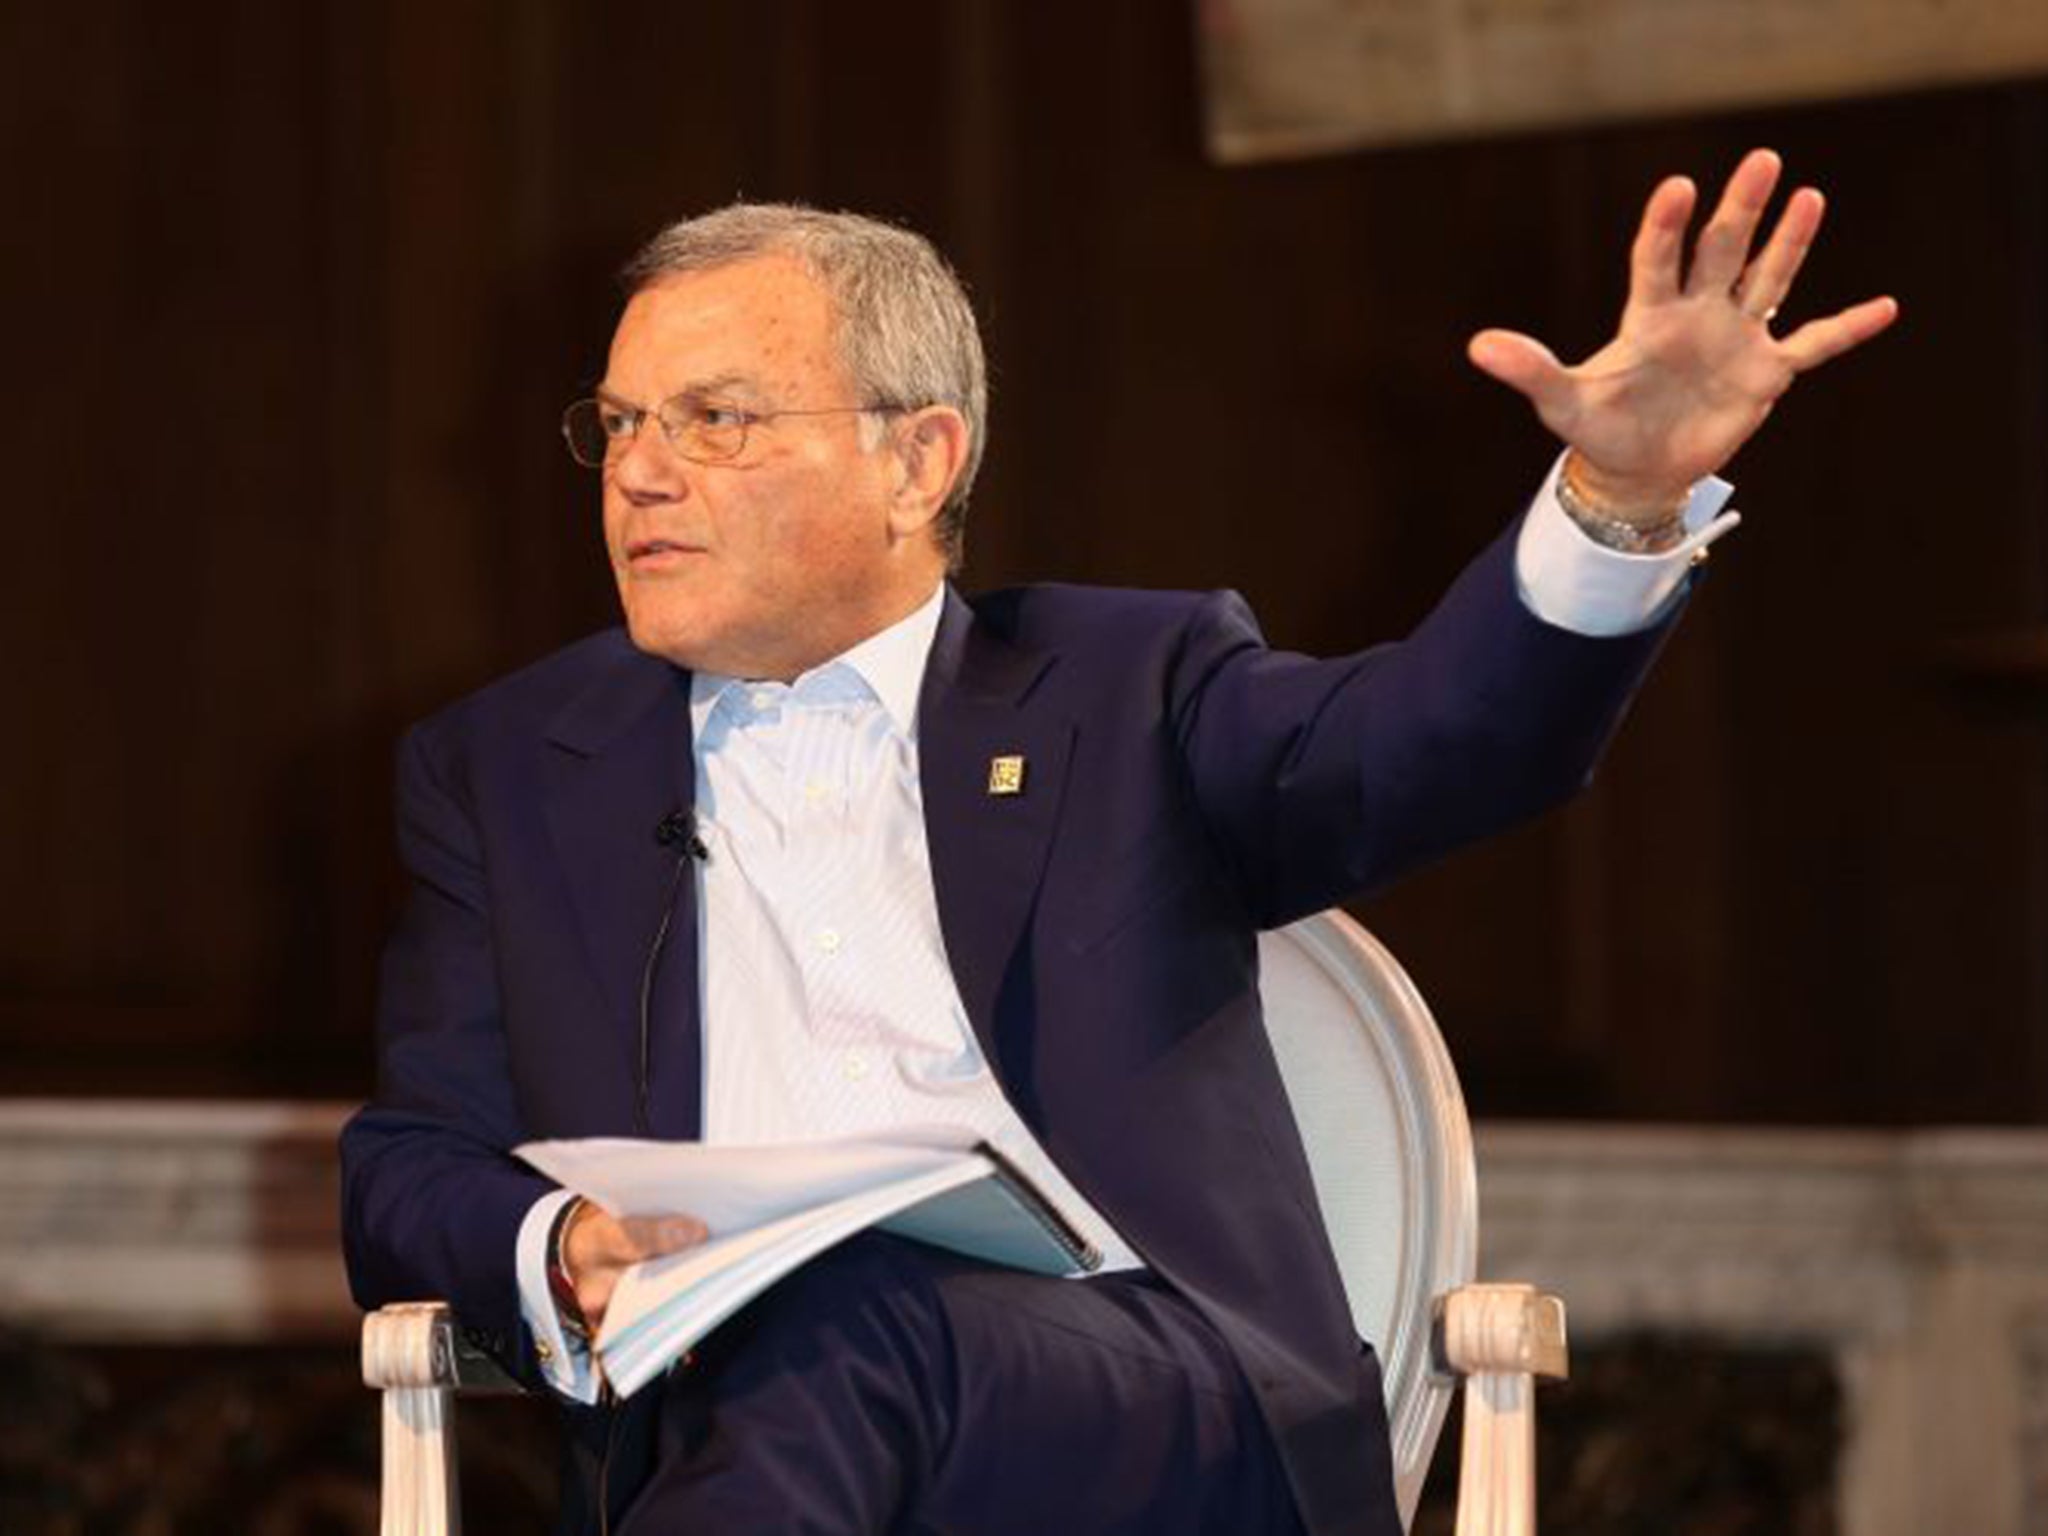 Sir Martin Sorrell heads up WPP, the world’s biggest ad company